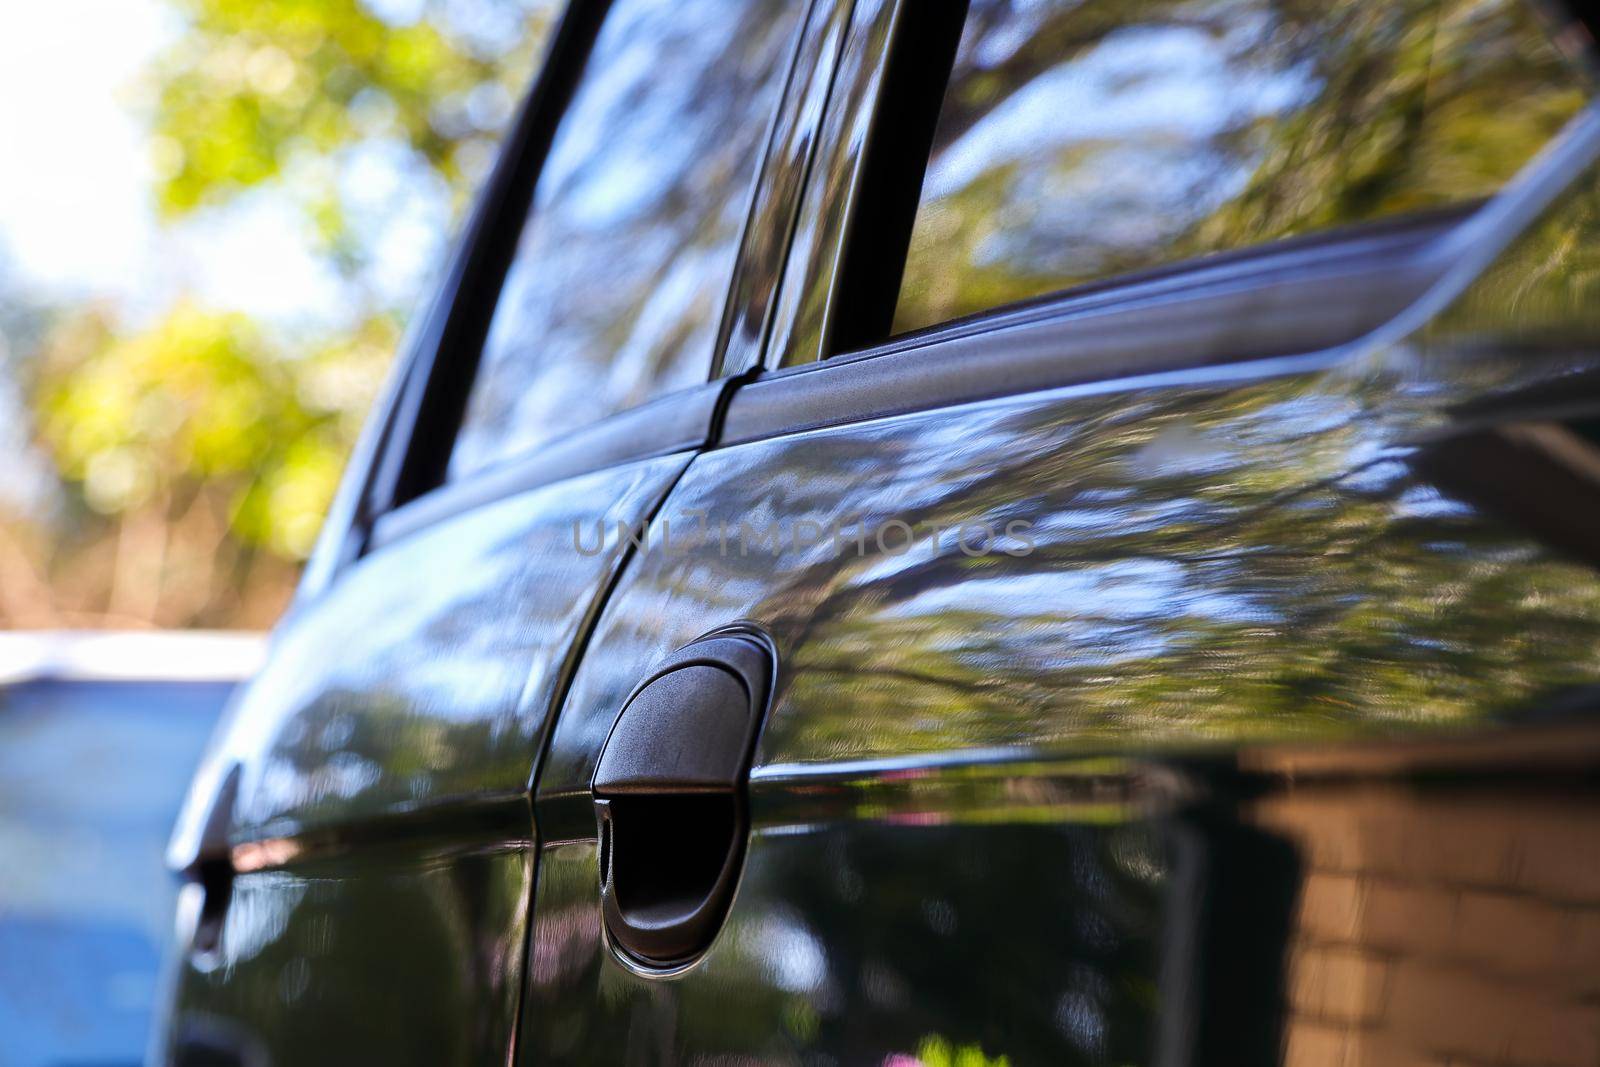 Car Door Handle And Reflection Detail Abstract by jjvanginkel